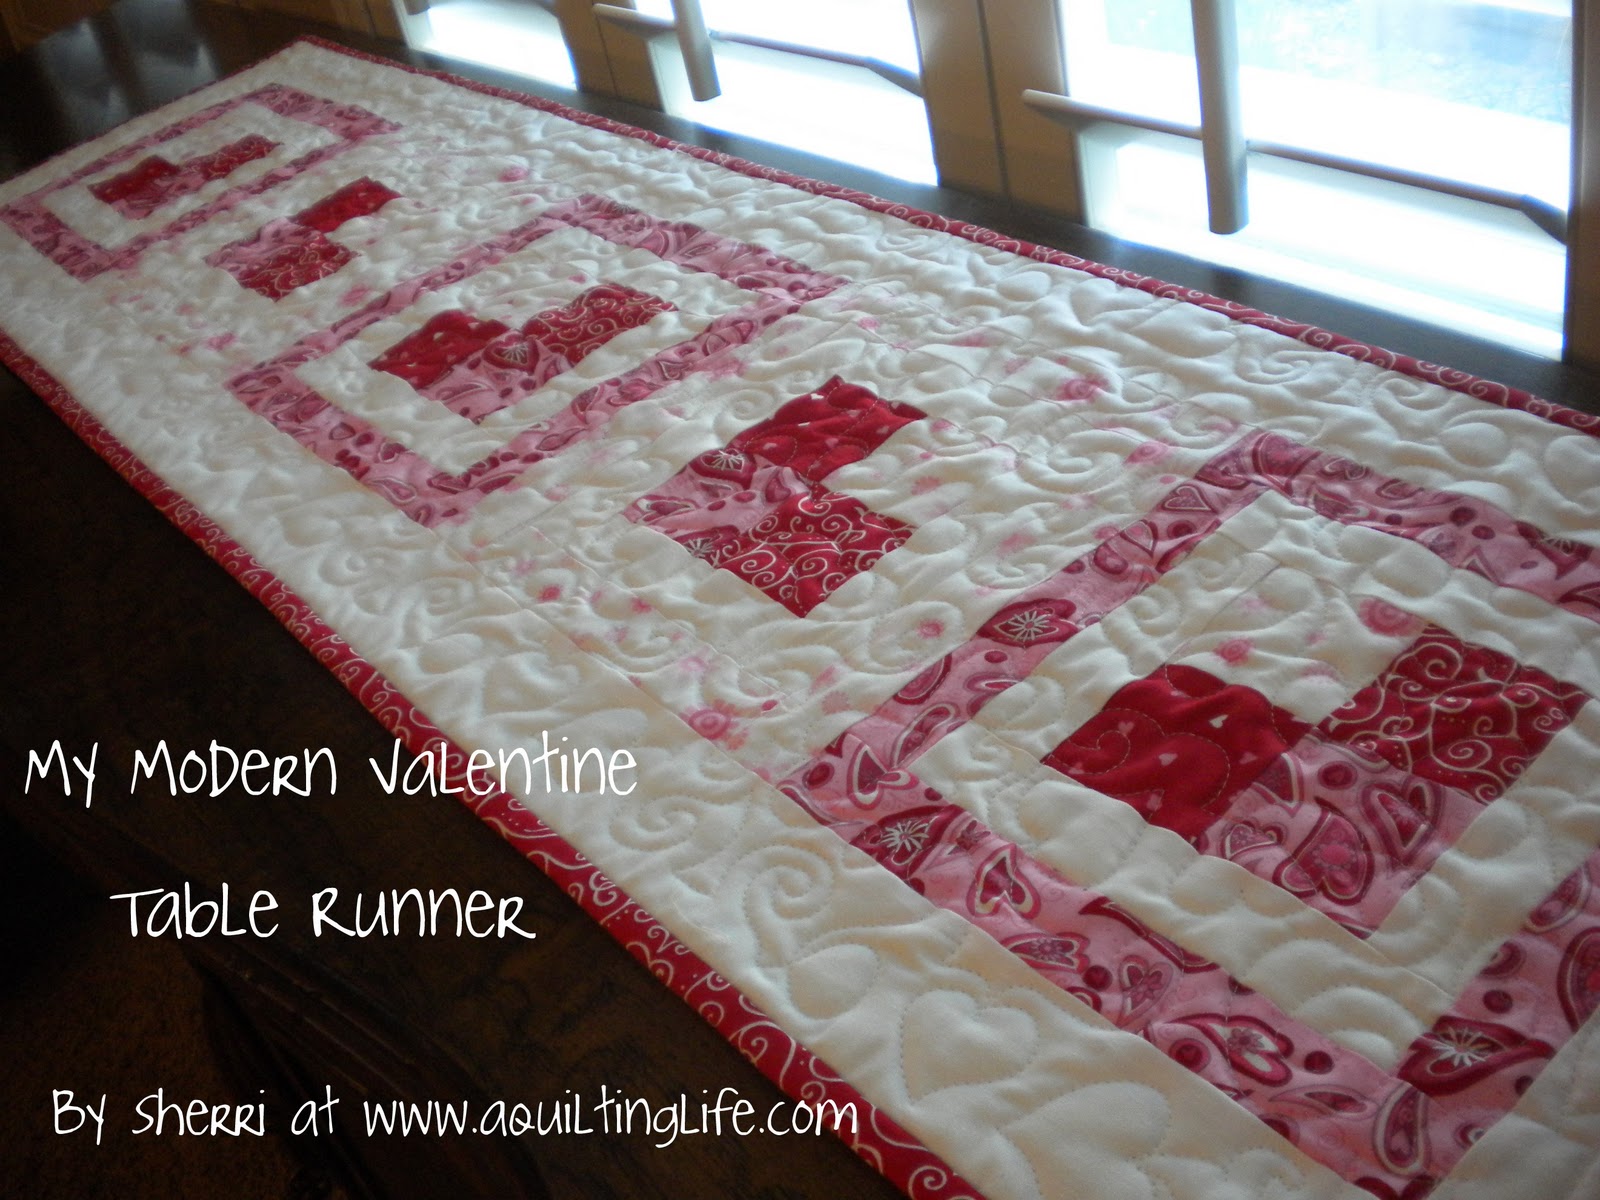 modern valentine table runner tutorial quilting life accent your focus now make quilt sandwich with top batting and backing desired then binding jcpenney shades bookcase kmart